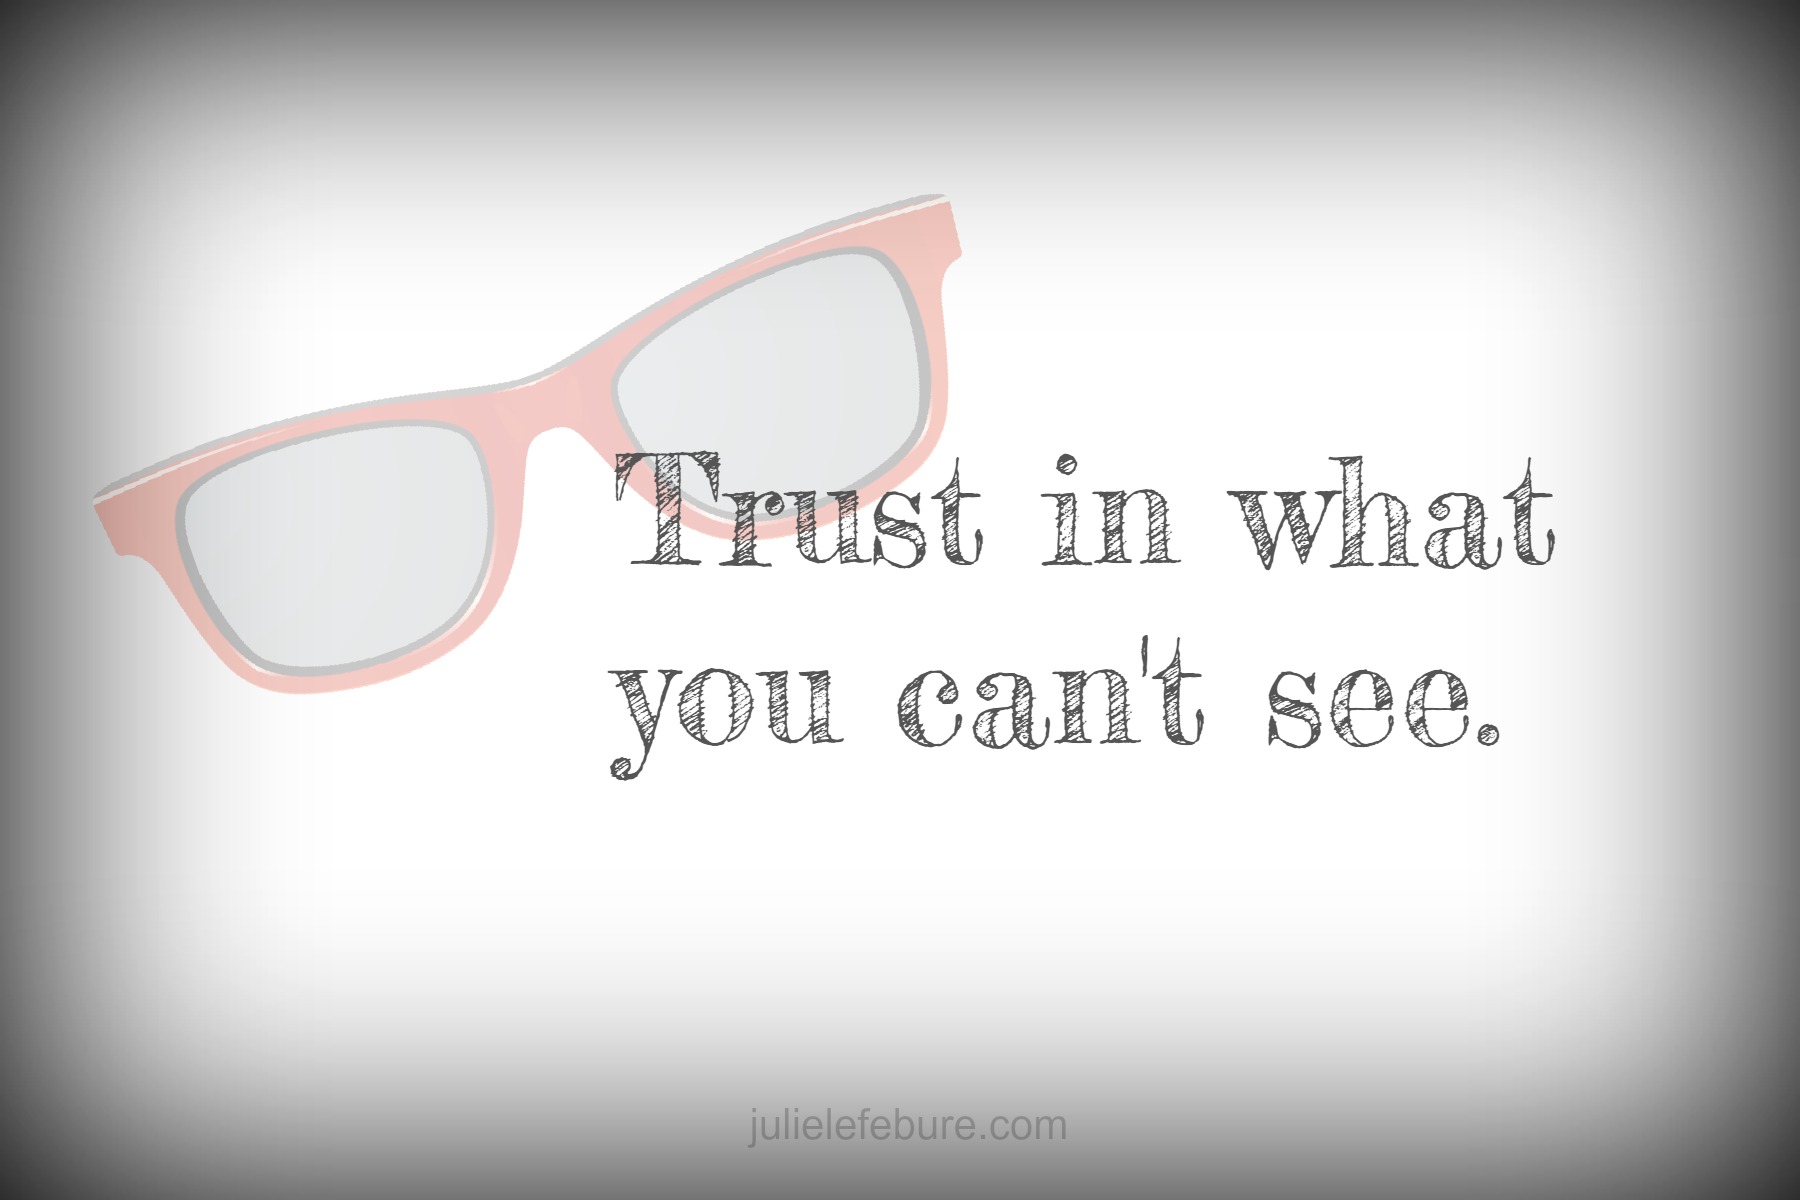 Trust In What We Can’t See